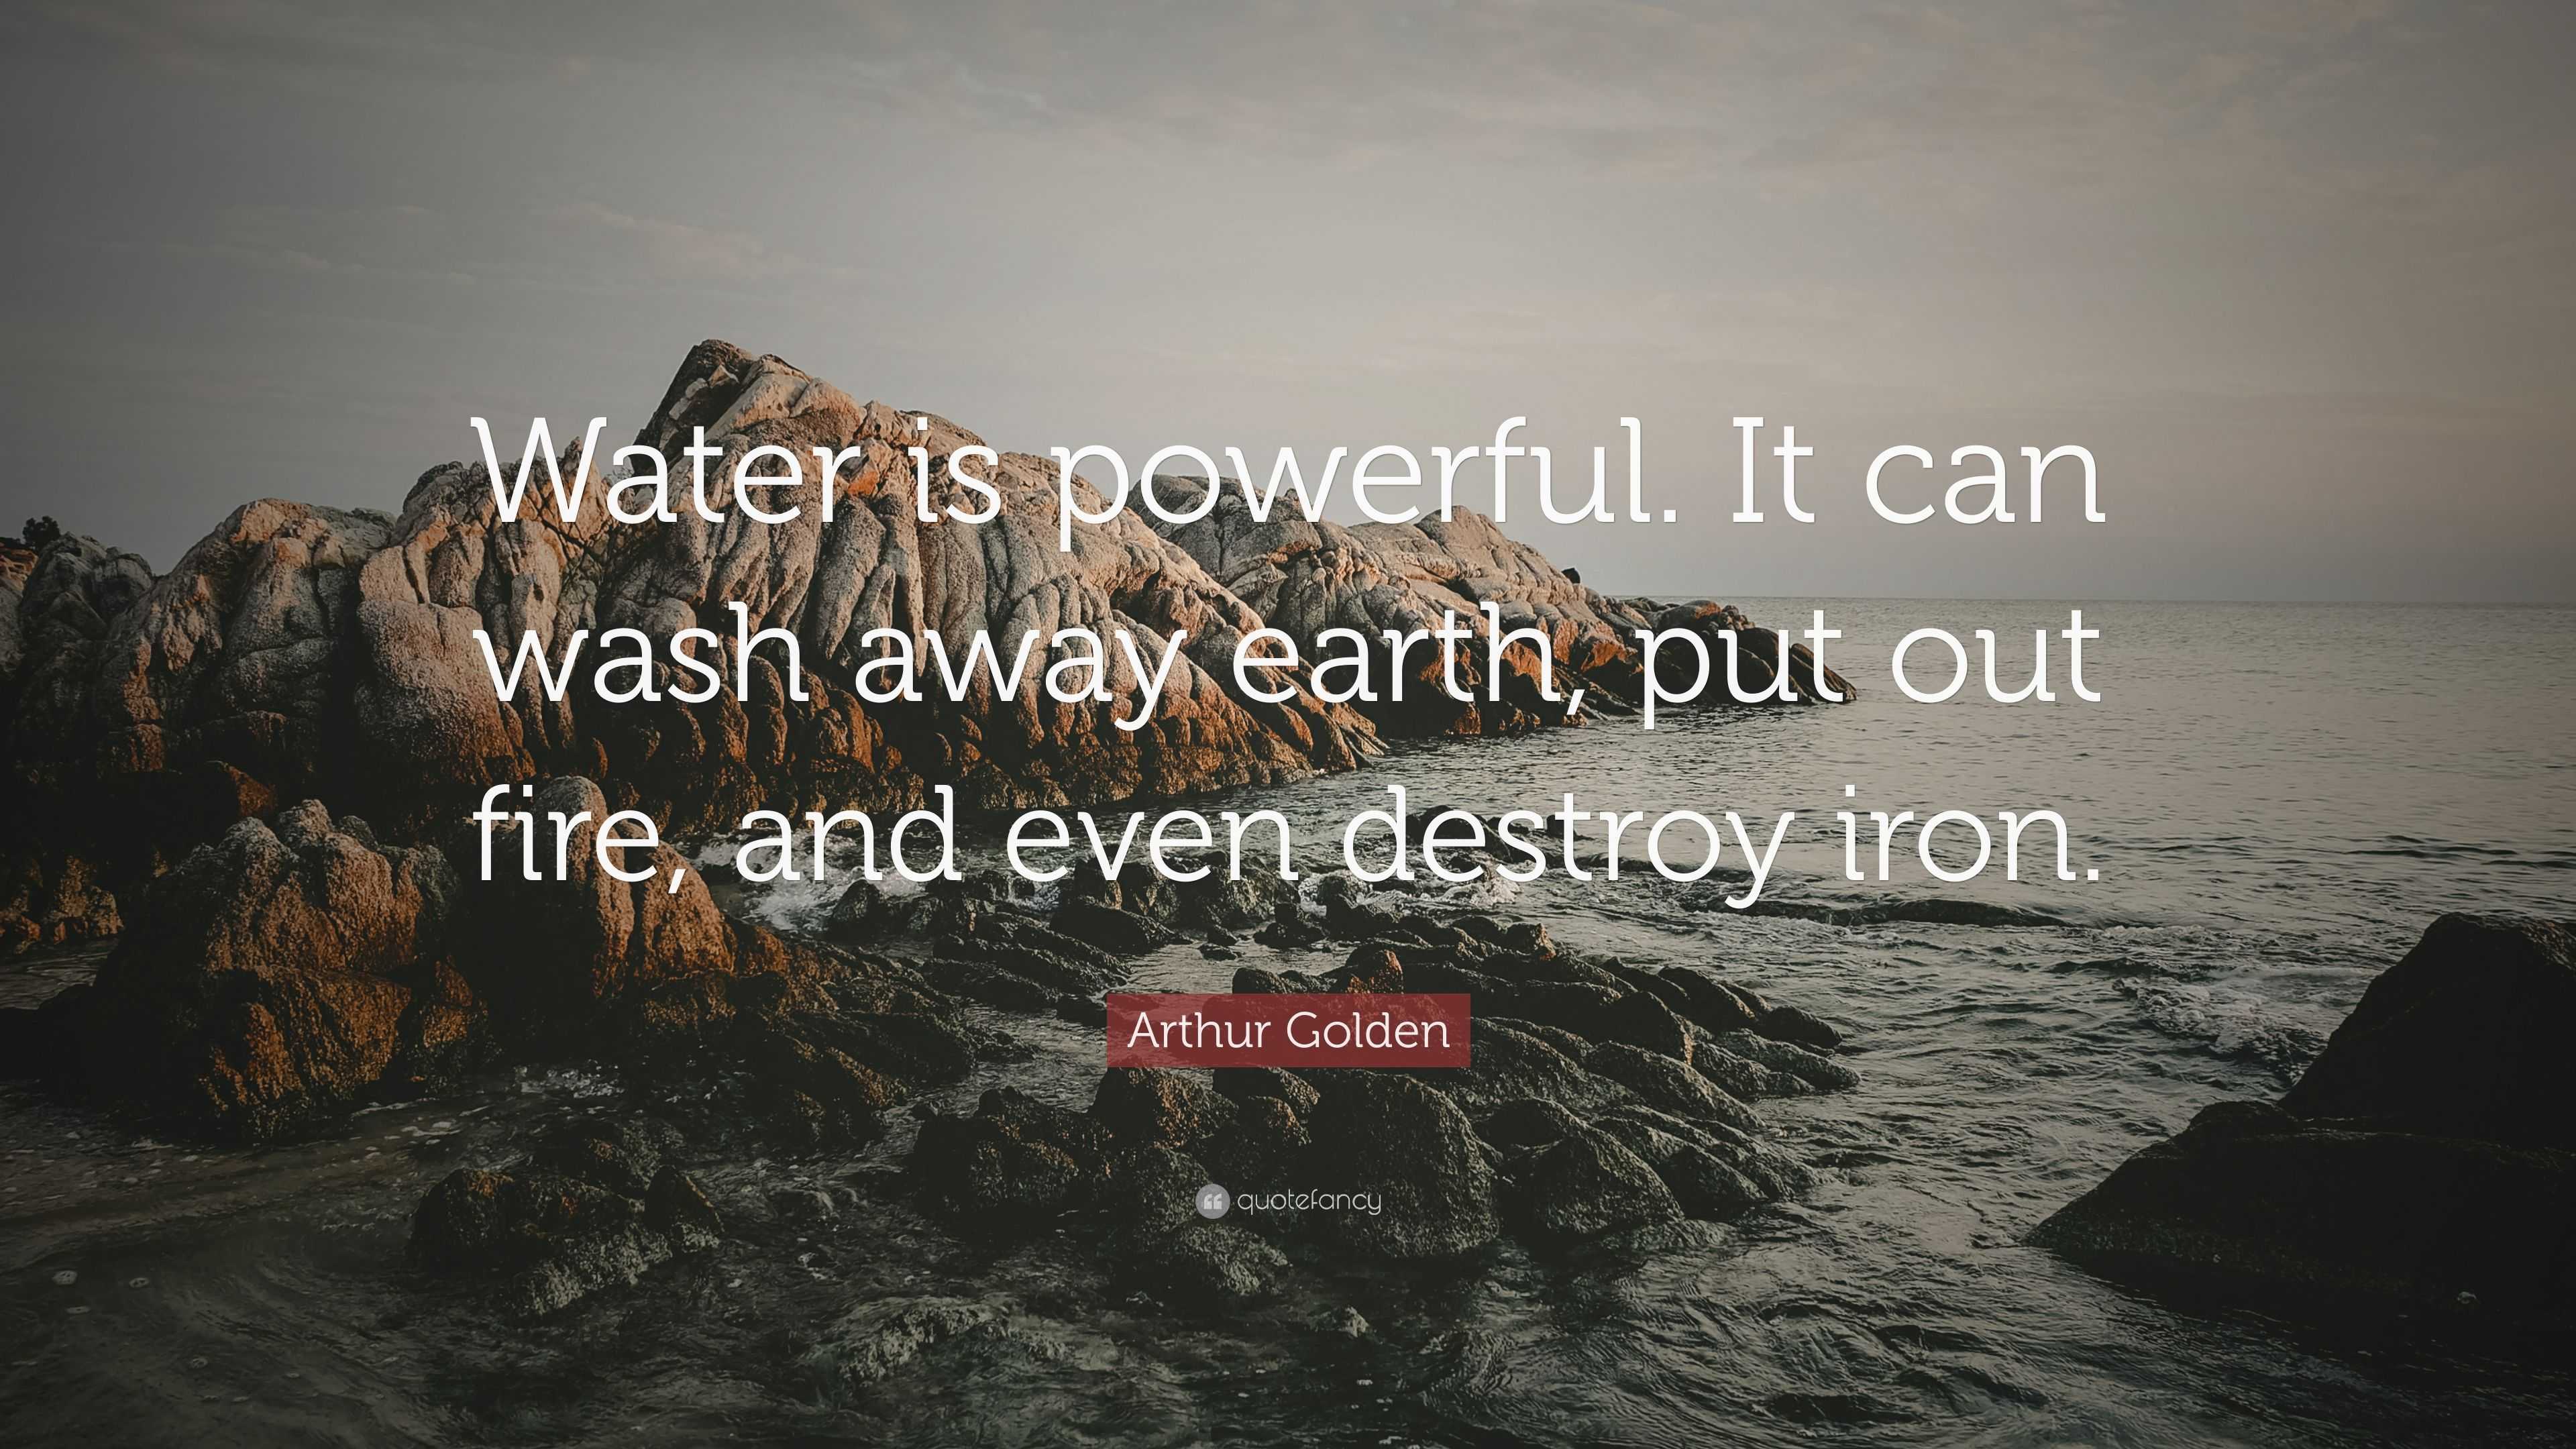 Arthur Golden Quote: “Water is powerful. It can wash away earth, put ...